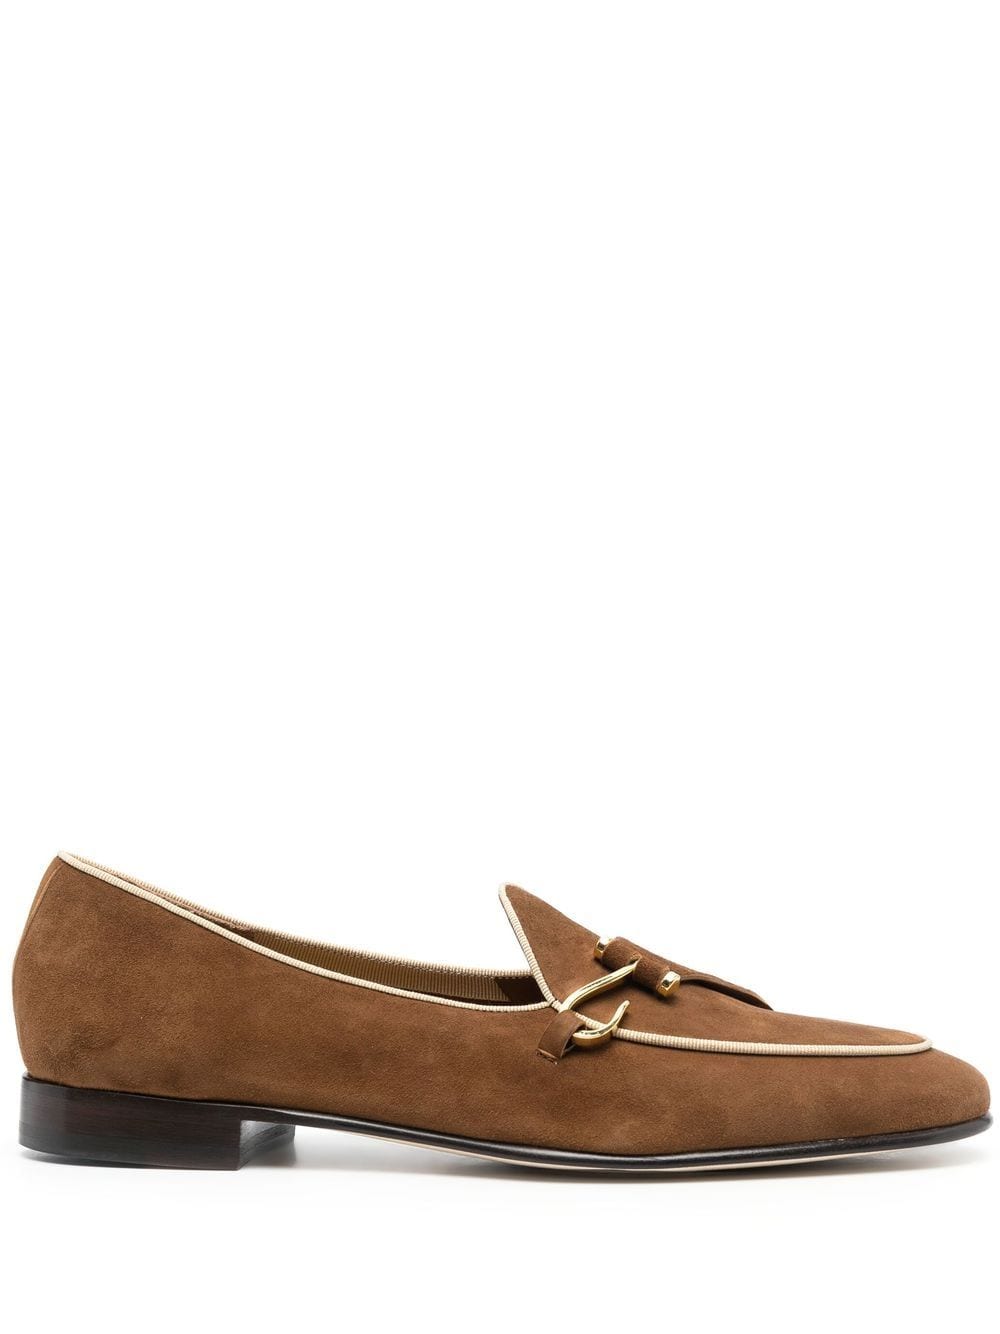 Edhen Milano Comporta leather loafers